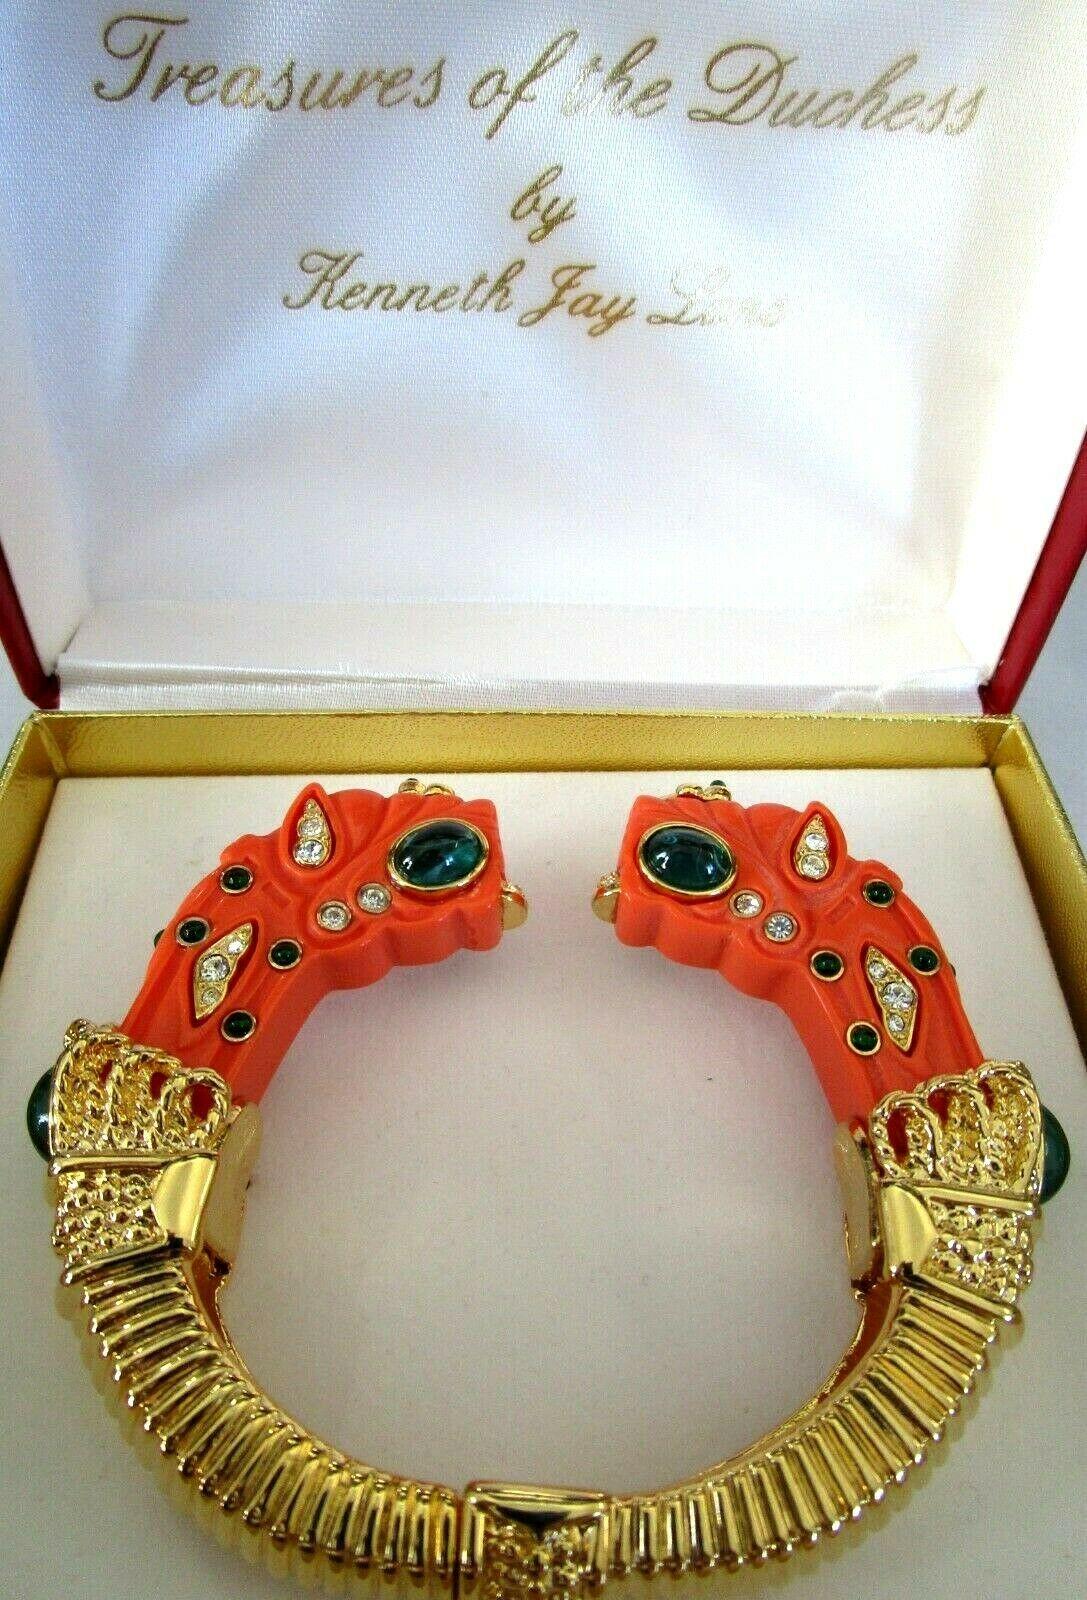 Magnificent Rare simulated Coral Dragon Bracelet. Treasures of the Duchess by Designer Kenneth Jay Lane. Enhanced with simulated Gemstones. Gold tone mounting. Signed hinged Bracelet measures approx. 3 ½” wide x 3” deep x 7/8 high. In unworn